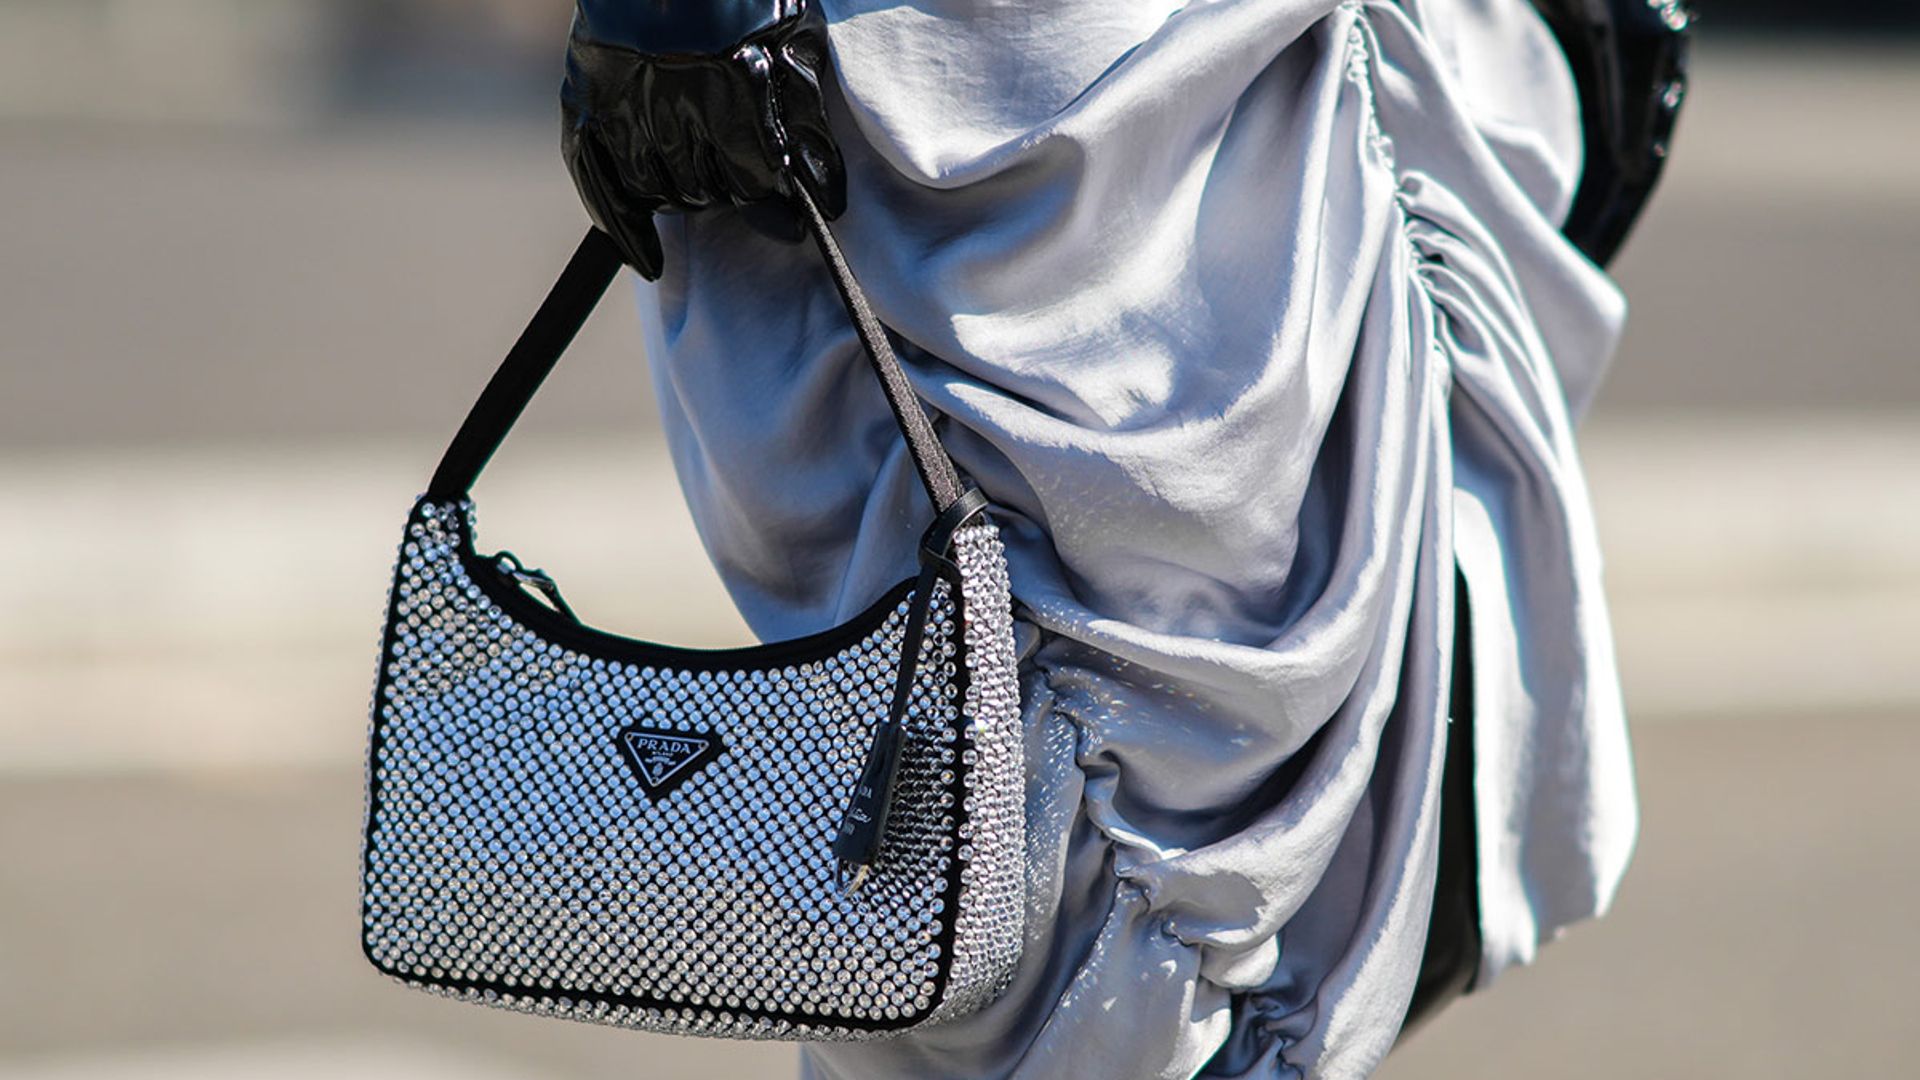 Primark's £8 sequin bag is a dead ringer for the Prada must-have tote